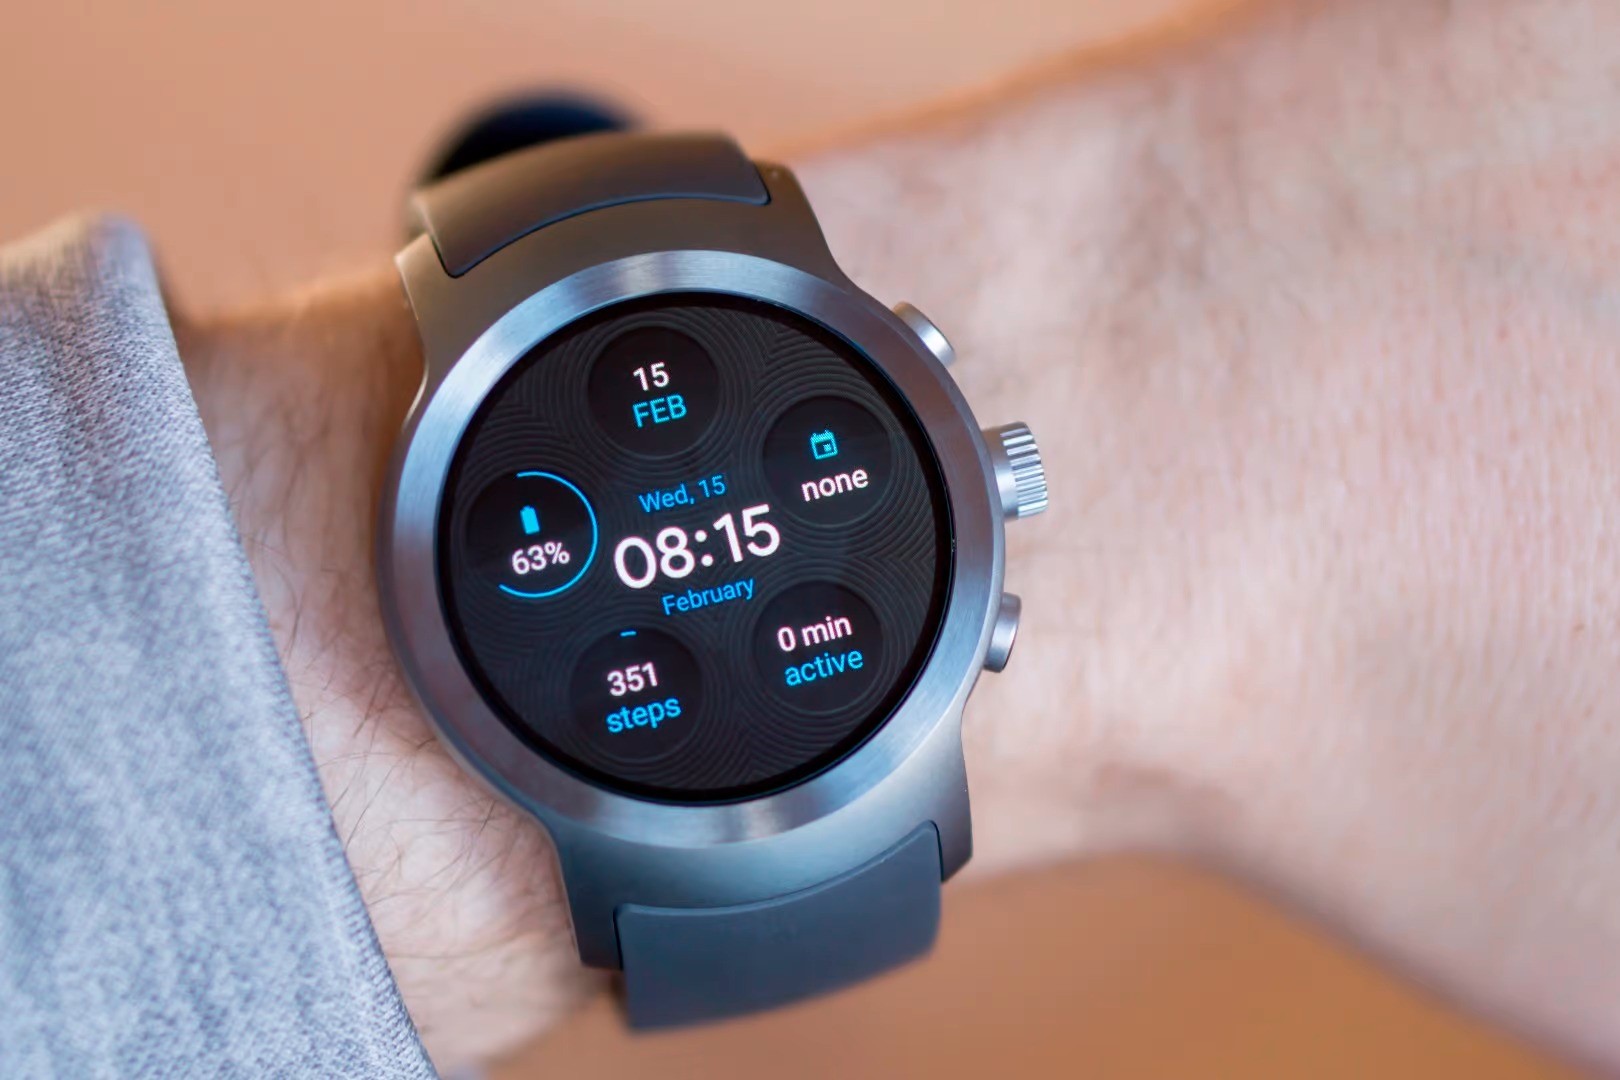 Standalone Smartwatches: Options For Using Without A Phone